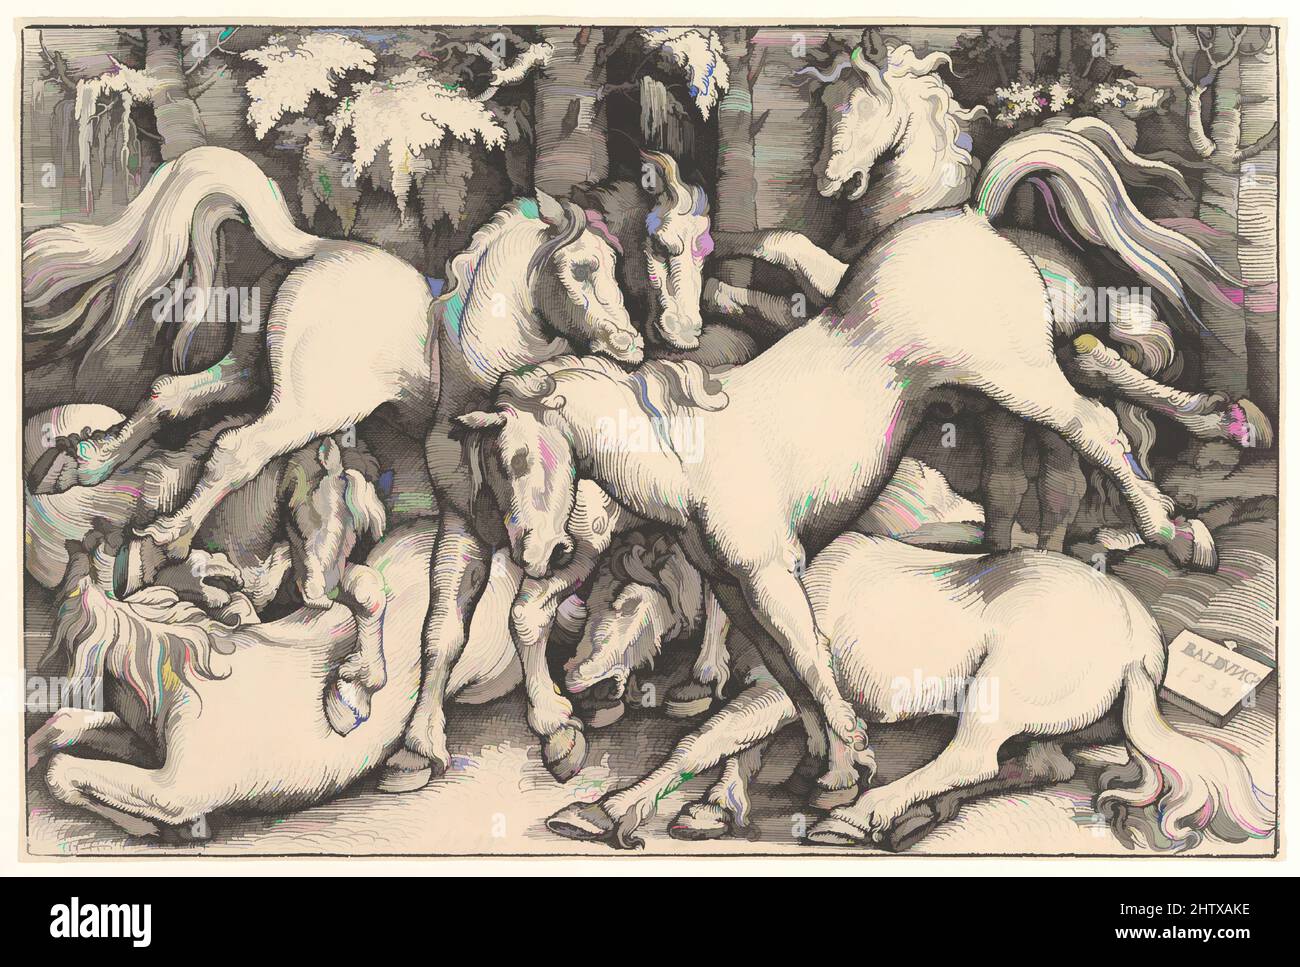 Art inspired by Group of Seven Horses, 1534, Woodcut, sheet: 8-5/8 x 12-7/8 in. (21.8 x 32.6 cm), Prints, Hans Baldung (called Hans Baldung Grien) (German, Schwäbisch Gmünd (?) 1484/85–1545 Strasbourg (Strassburg)), In 1534 Baldung made three woodcuts of wild horses in a dark and dense, Classic works modernized by Artotop with a splash of modernity. Shapes, color and value, eye-catching visual impact on art. Emotions through freedom of artworks in a contemporary way. A timeless message pursuing a wildly creative new direction. Artists turning to the digital medium and creating the Artotop NFT Stock Photo